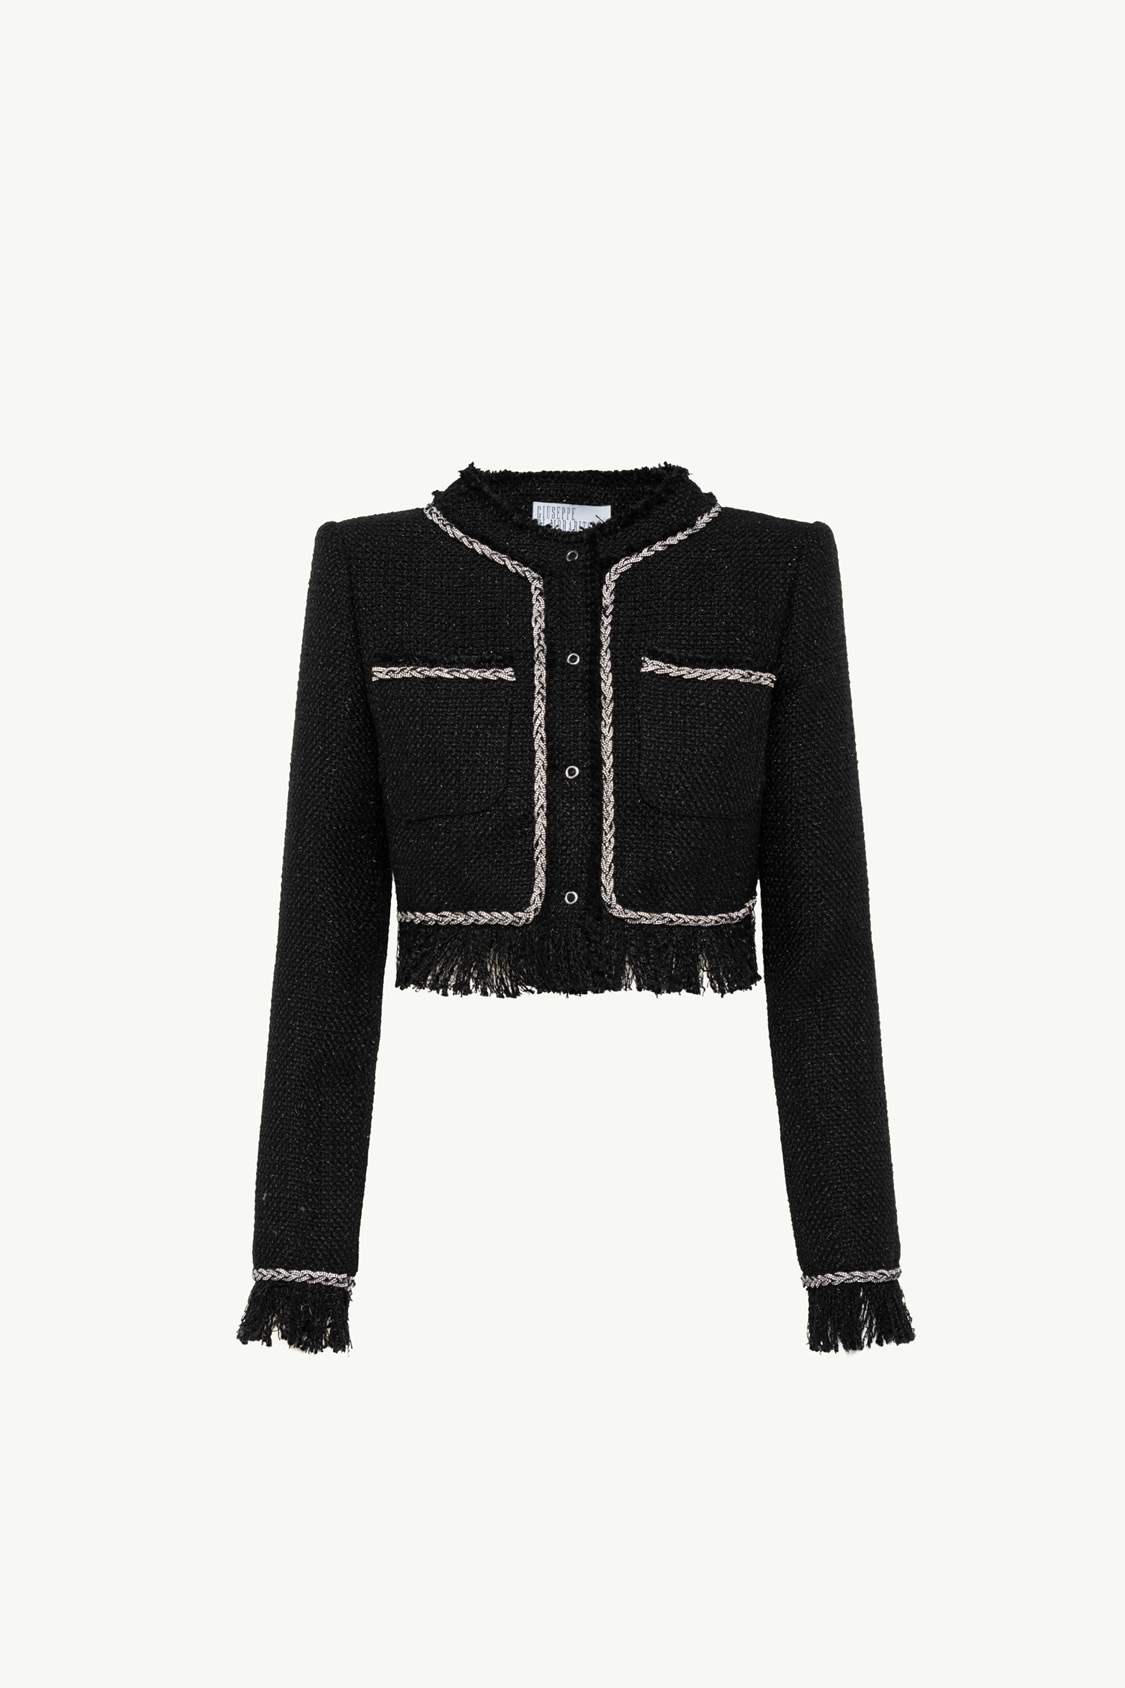 MADE IN ITALY CREW NECK CROPPED JACKET IN BOUCLÉ FABRIC